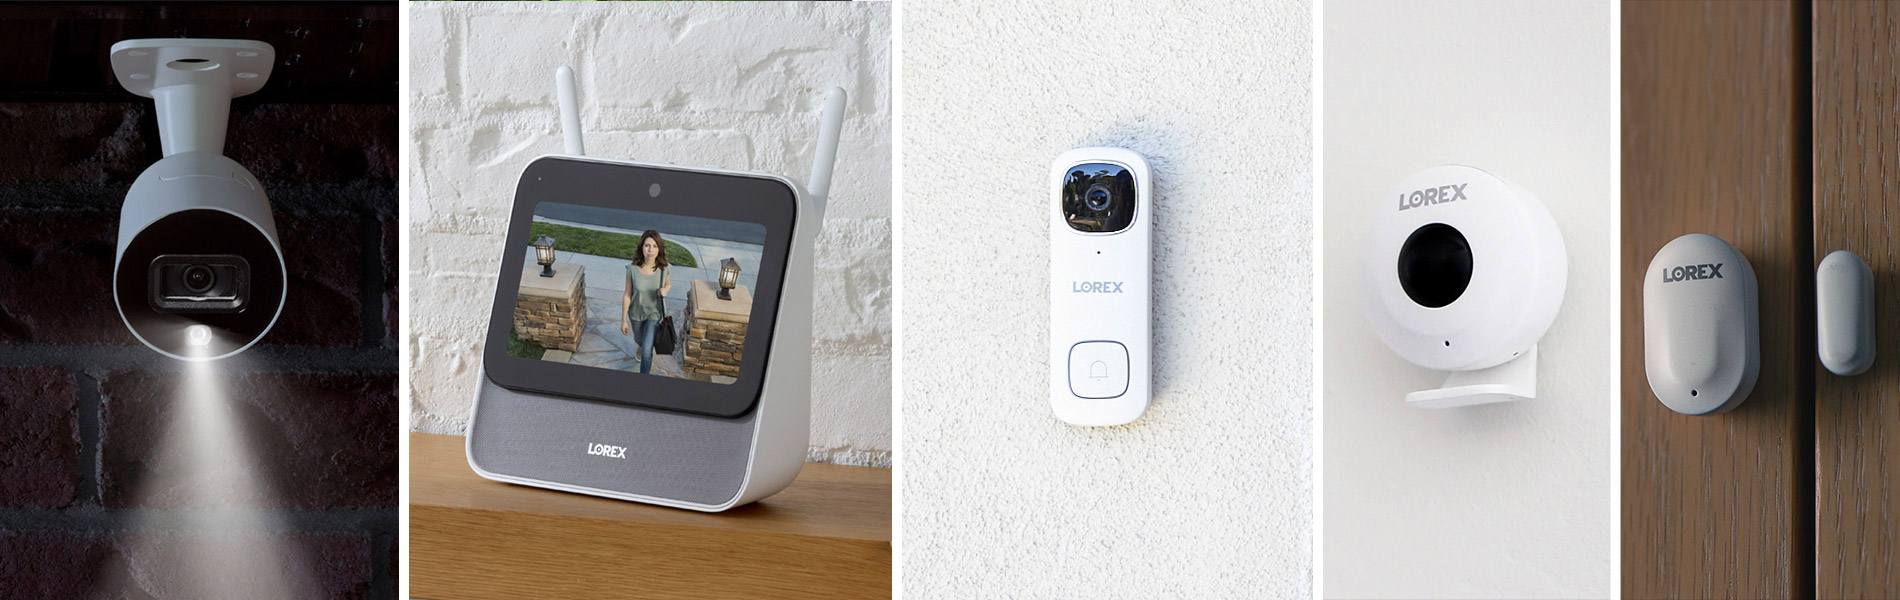 Lorex Smart Home Security Center with 4 Cameras and Motion Sensors